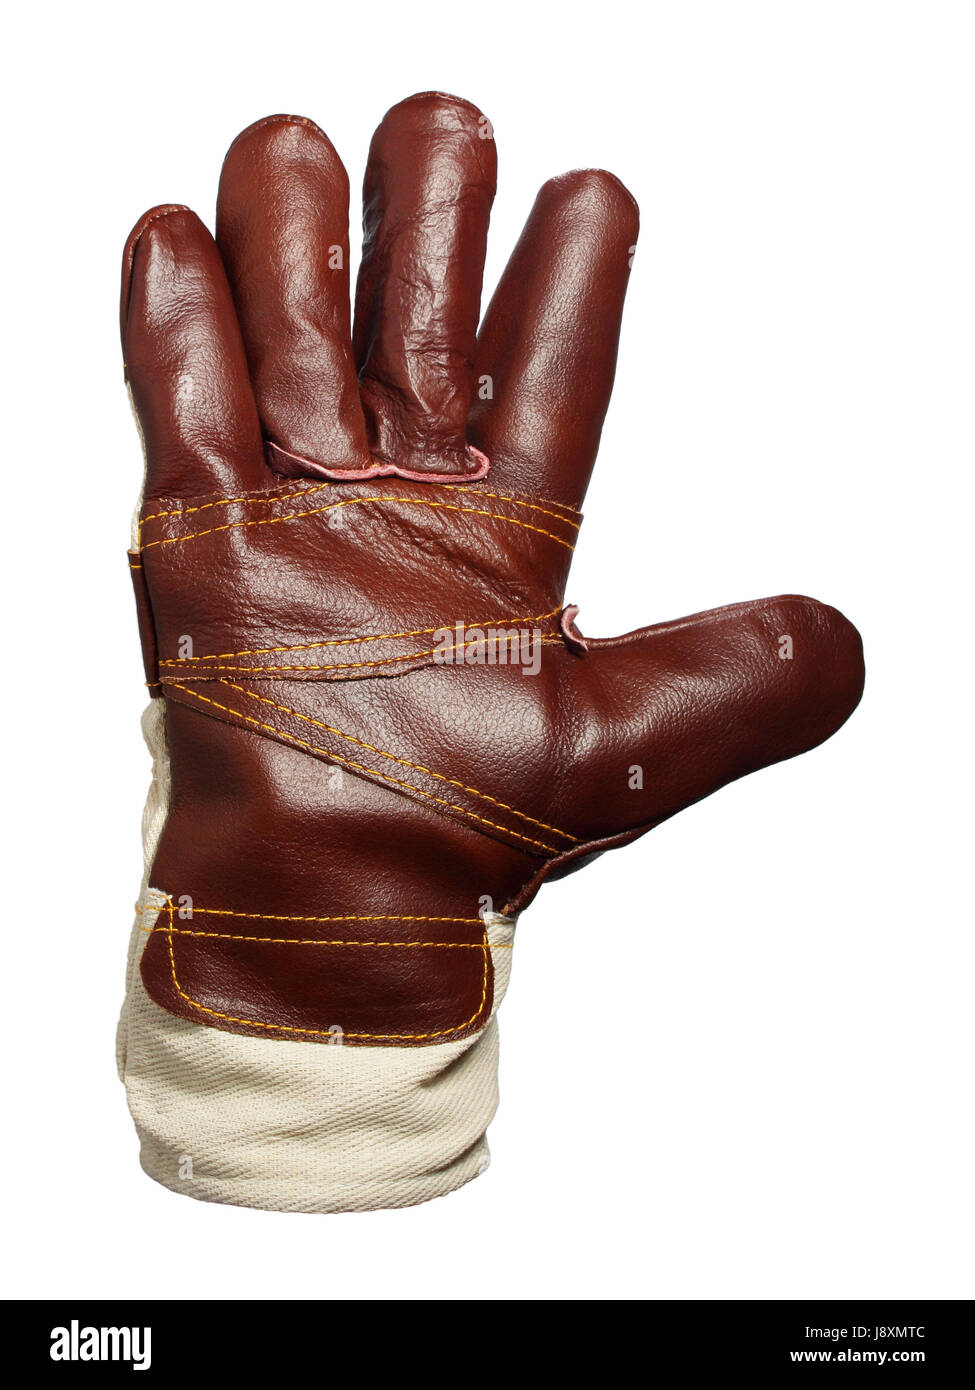 sign, signal, dismissal, leather, glove, crisis, protect, protection, gesture, Stock Photo